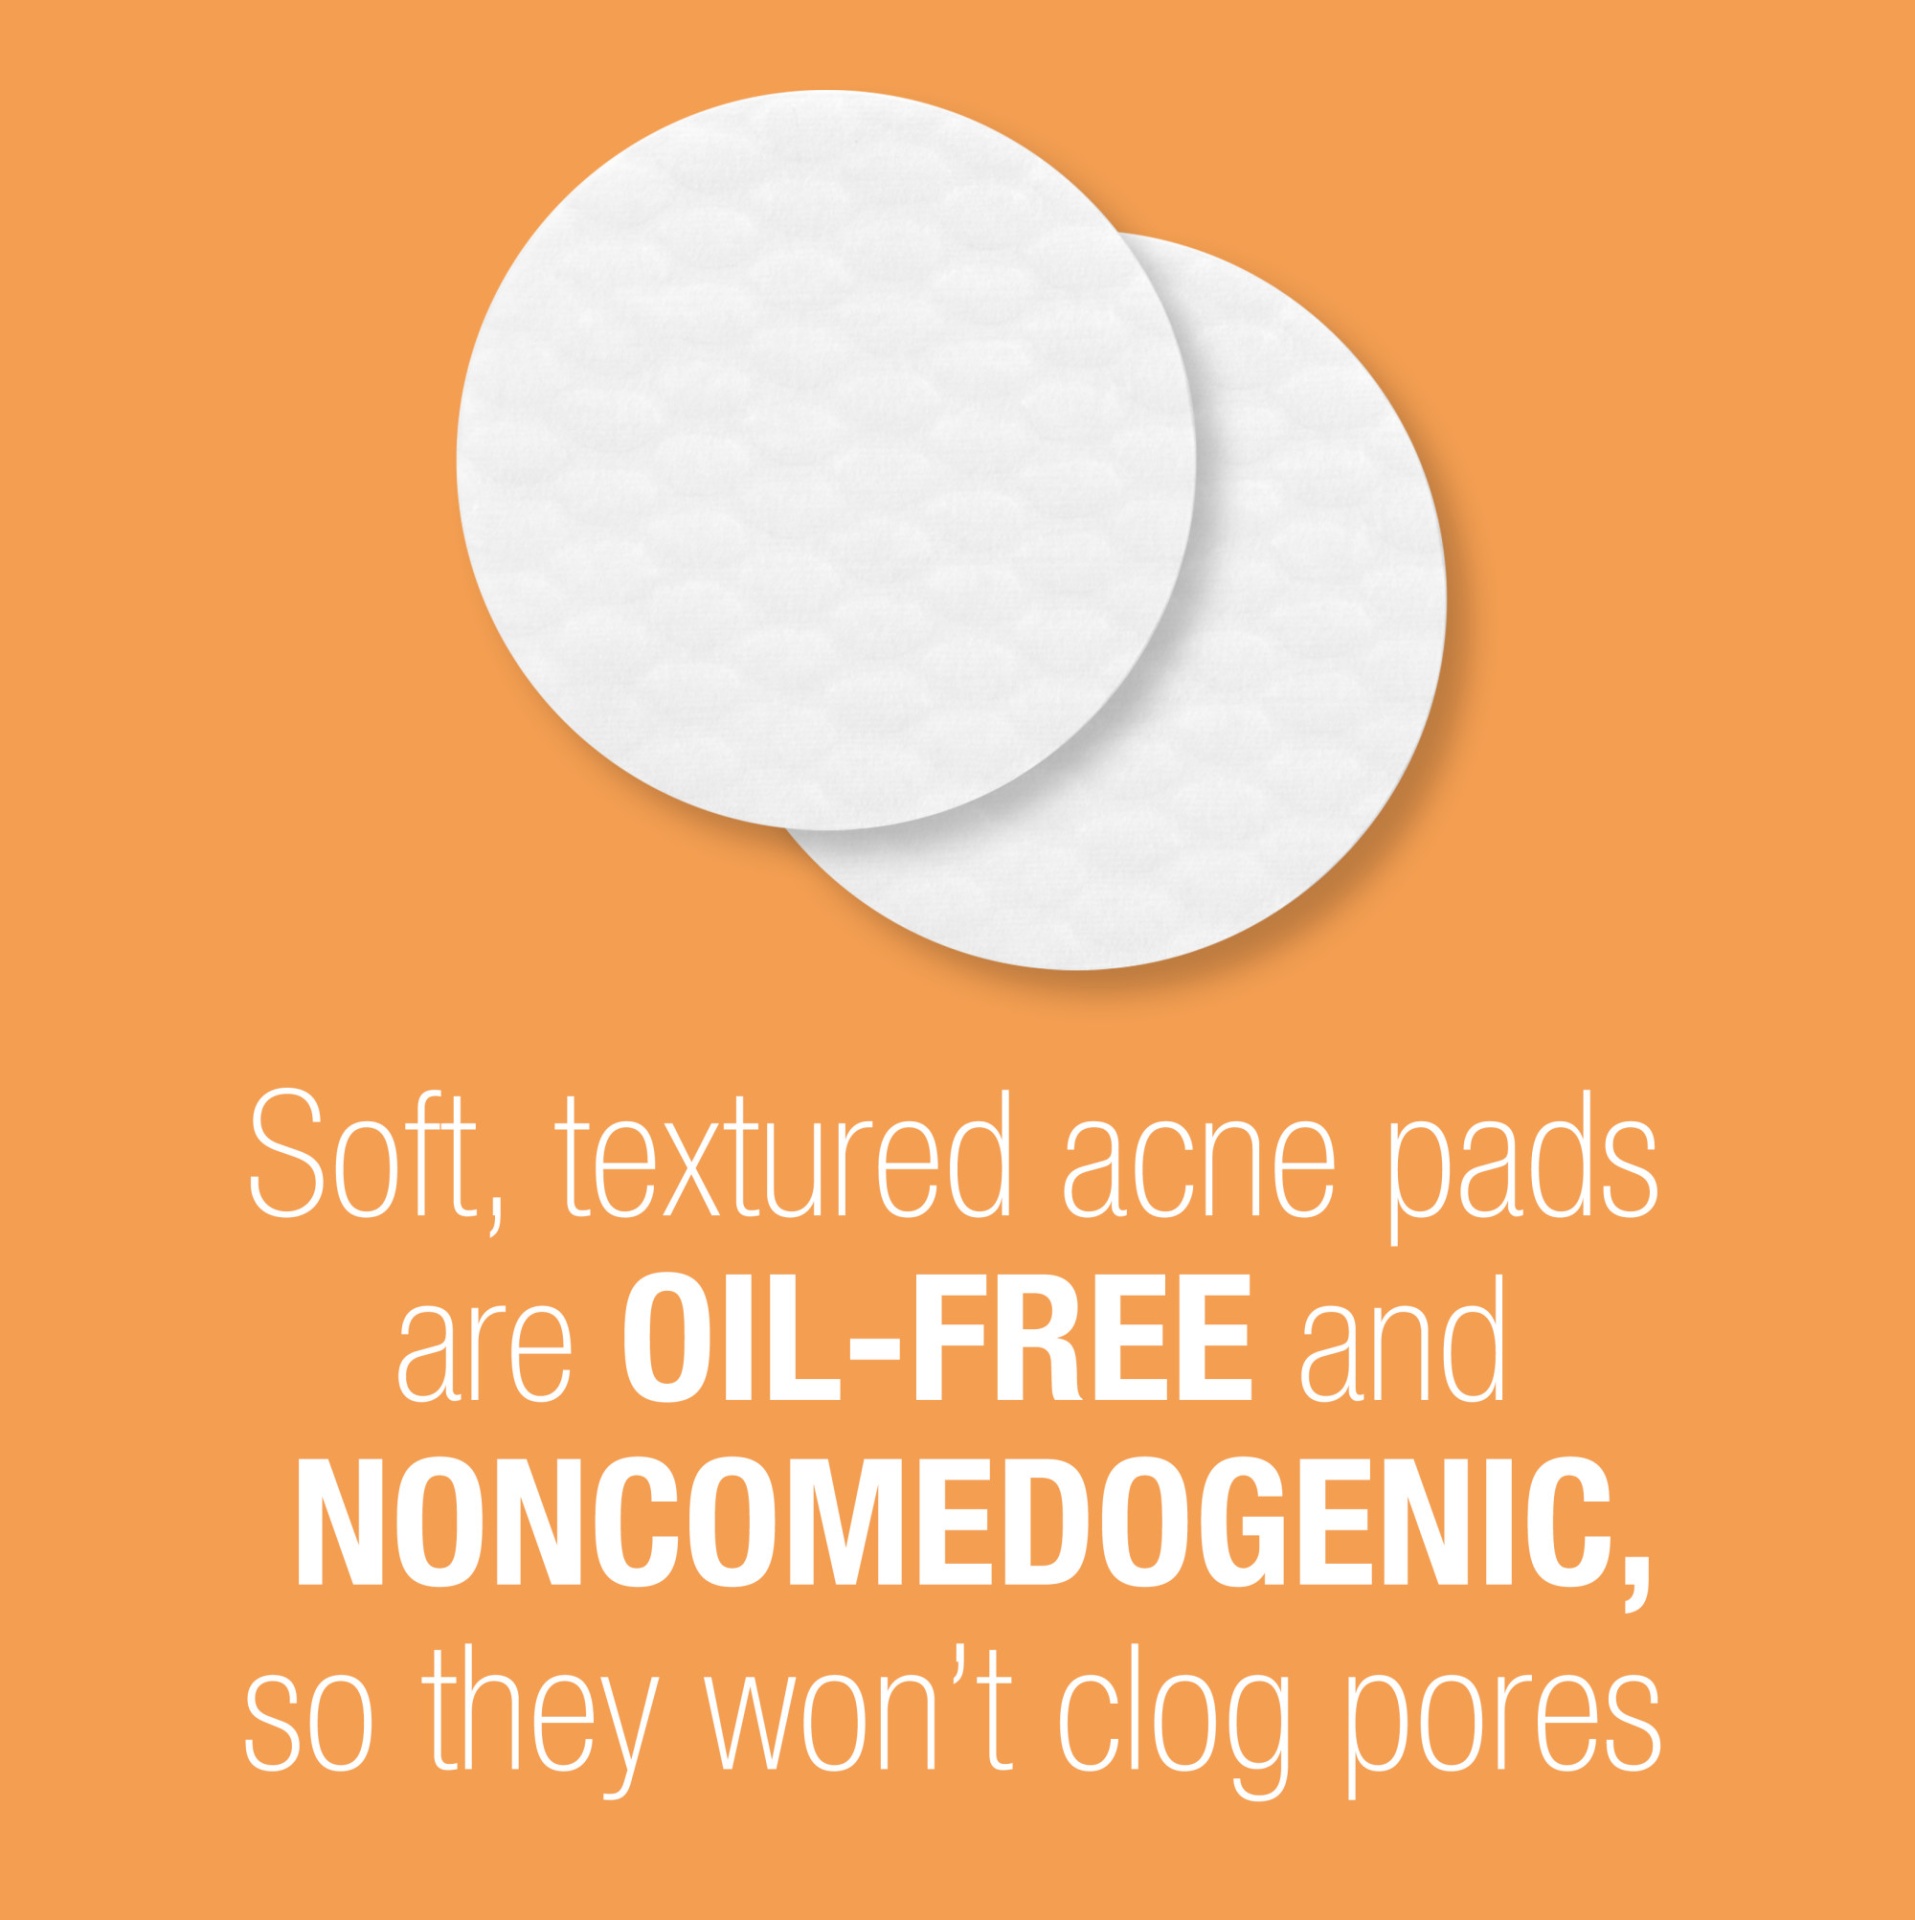 slide 3 of 7, Neutrogena Rapid Clear Maximum Strength Acne Face Pads with 2% Salicylic Acid Acne Treatment Medication to Help Fight Breakouts, Oil-Free Facial Cleansing Pads for Acne-Prone Skin, 60 ct